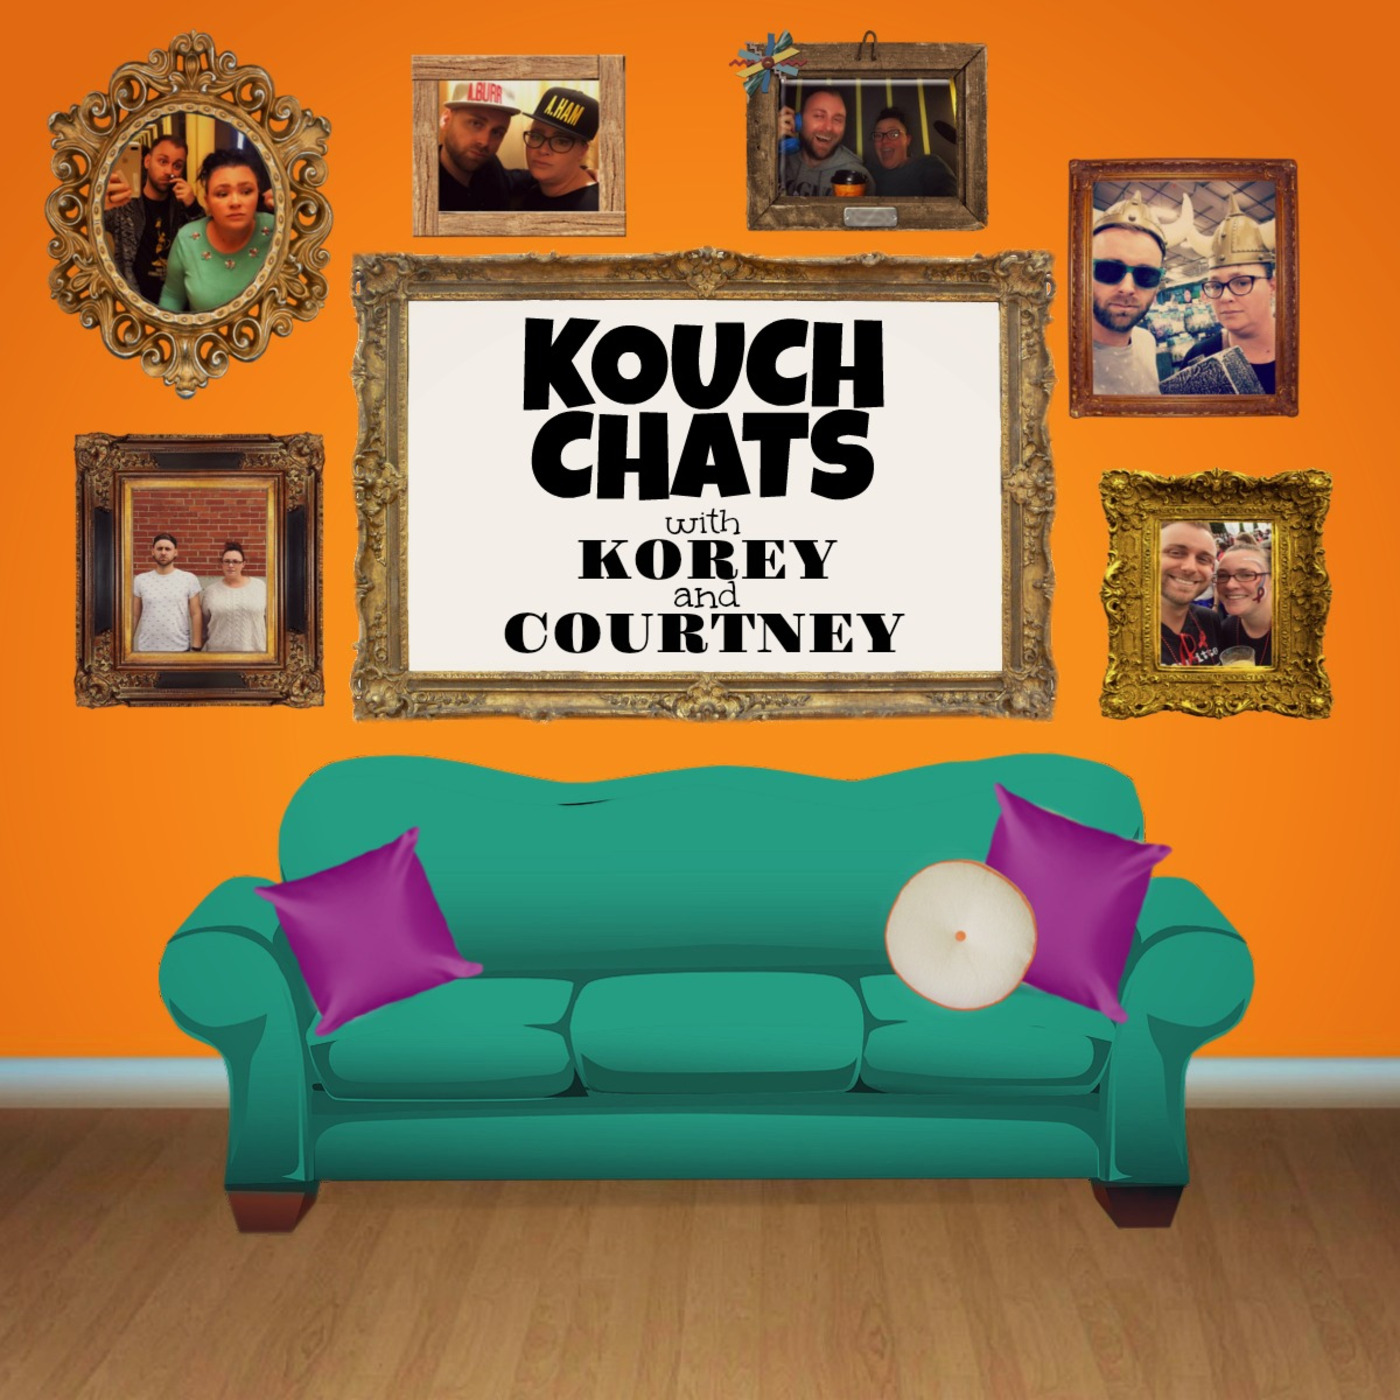 Kouch Chats with Korey and Courtney